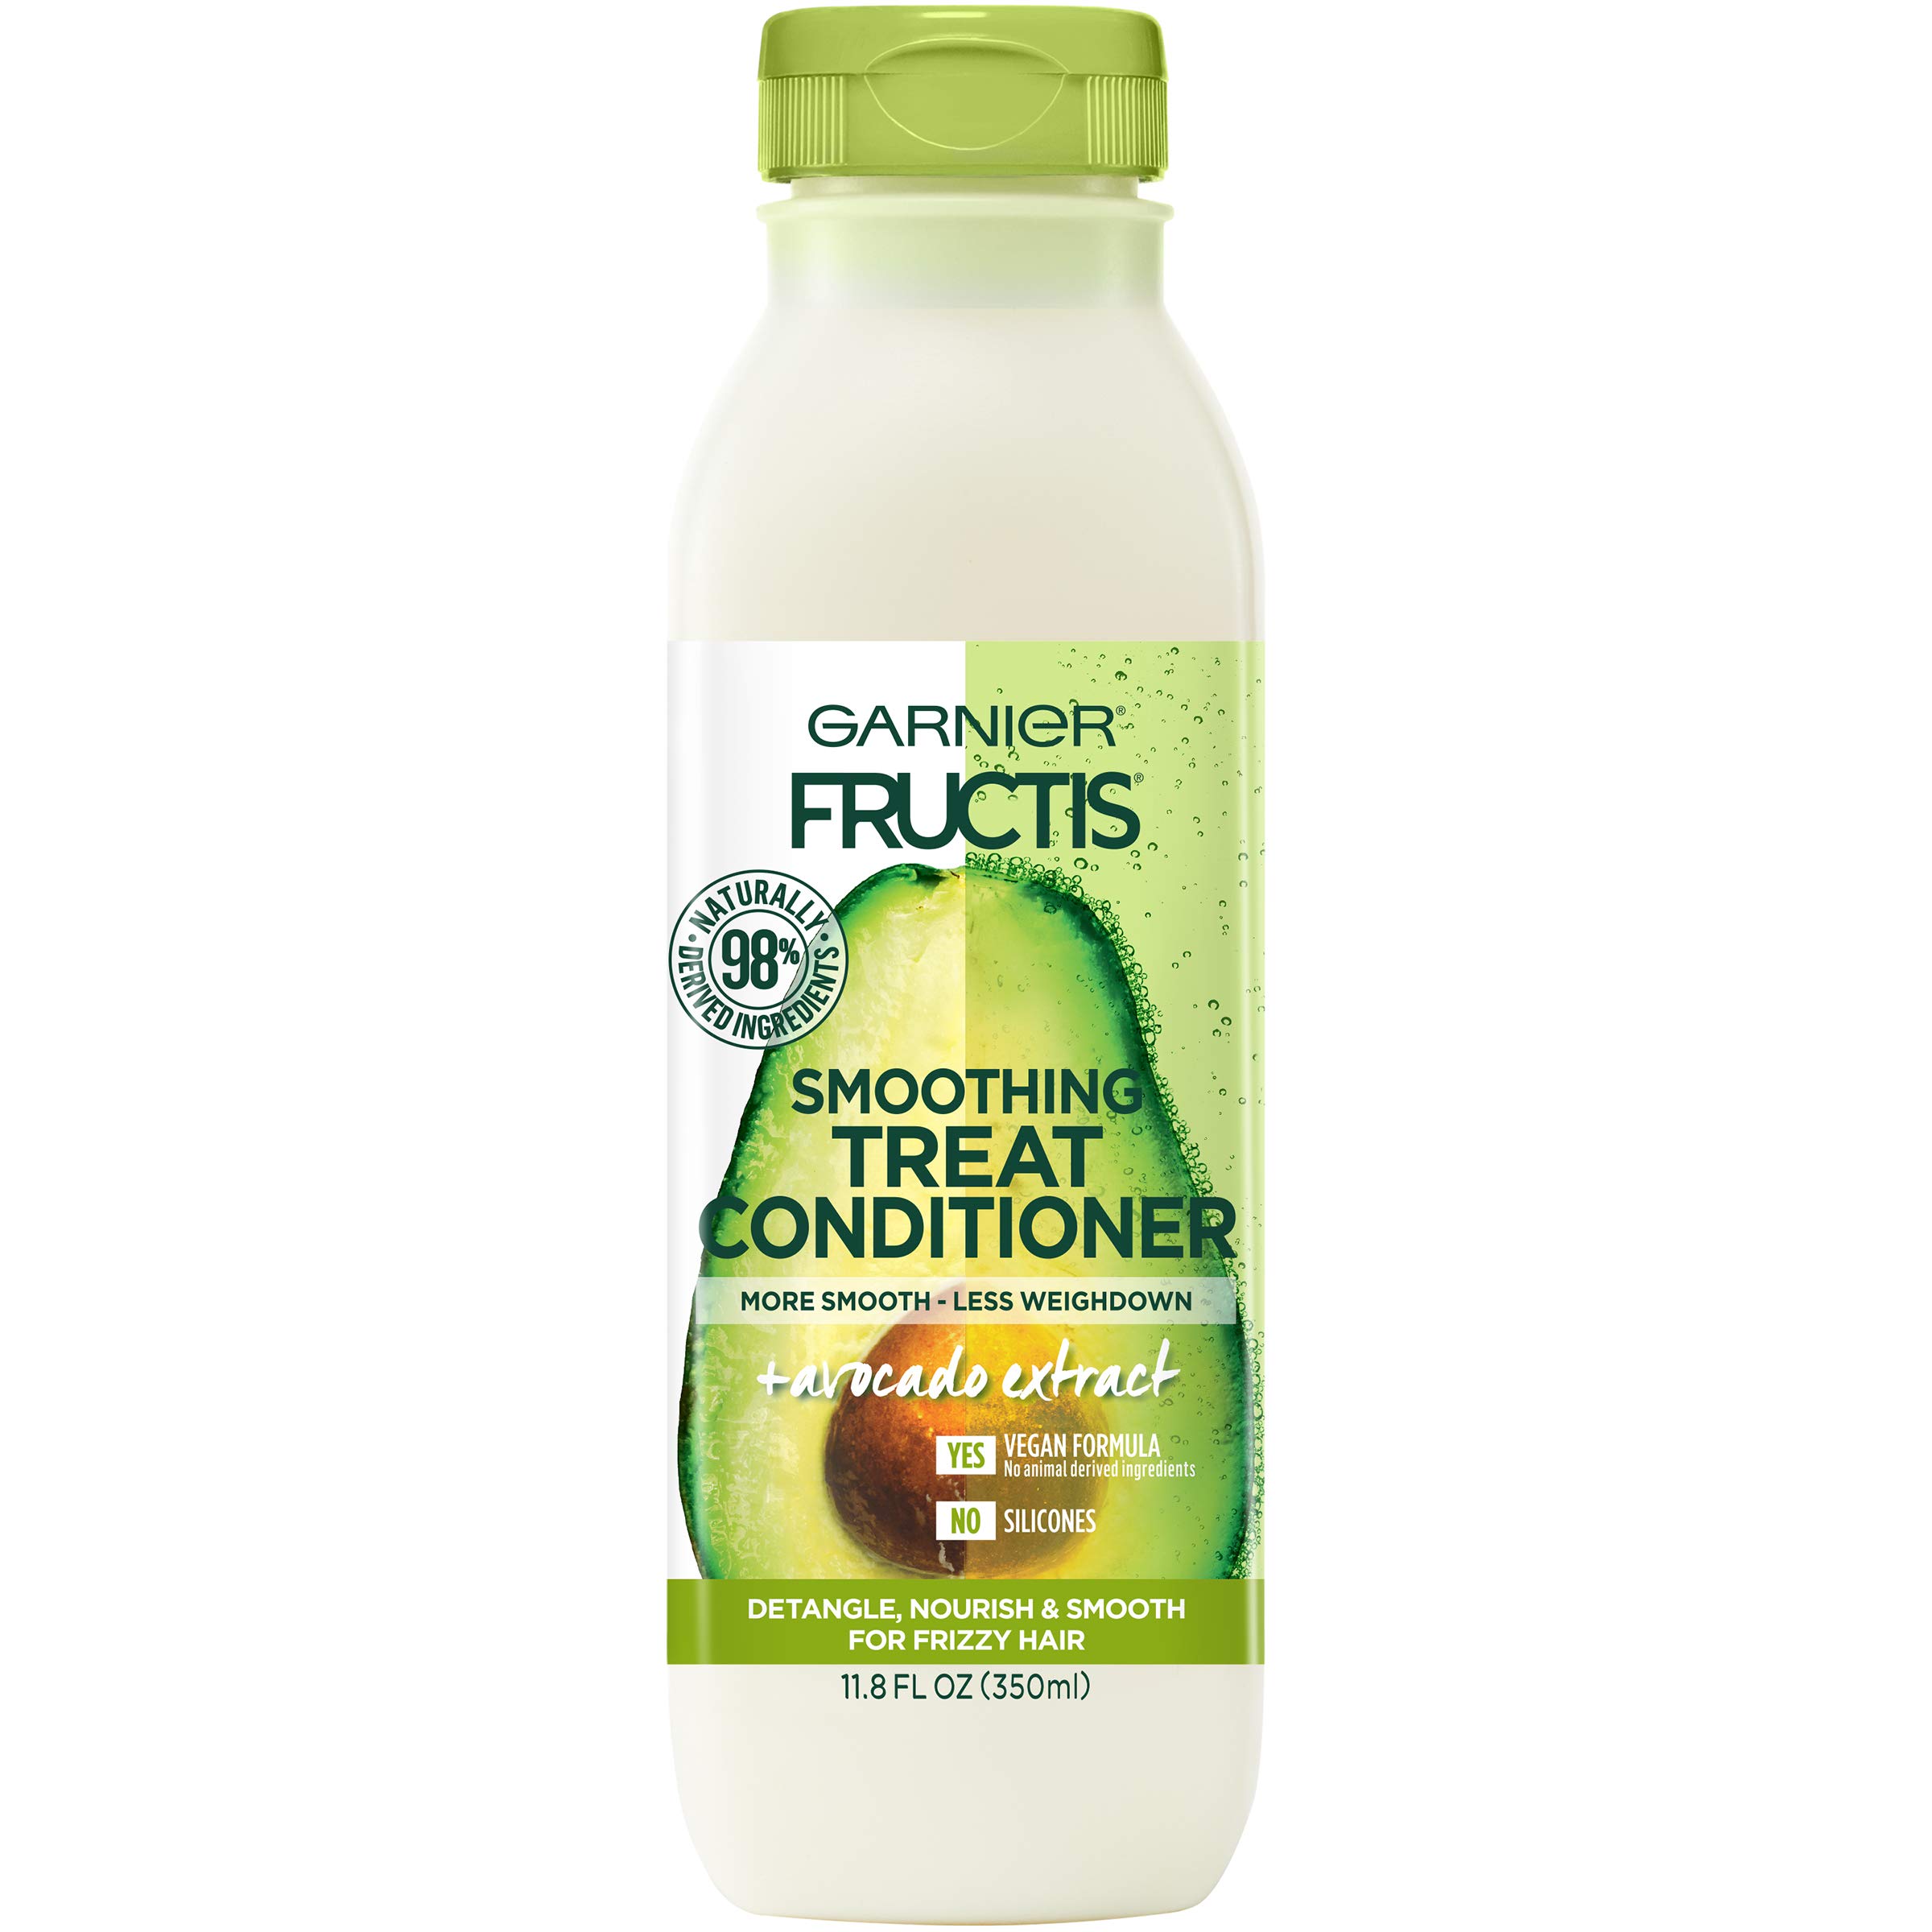 Garnier Fructis Smoothing Treat Conditioner, 98 Percent Naturally Derived Ingredients, Avocado, Nourish and Smooth for Frizzy Hair, 11.8 Fl Oz